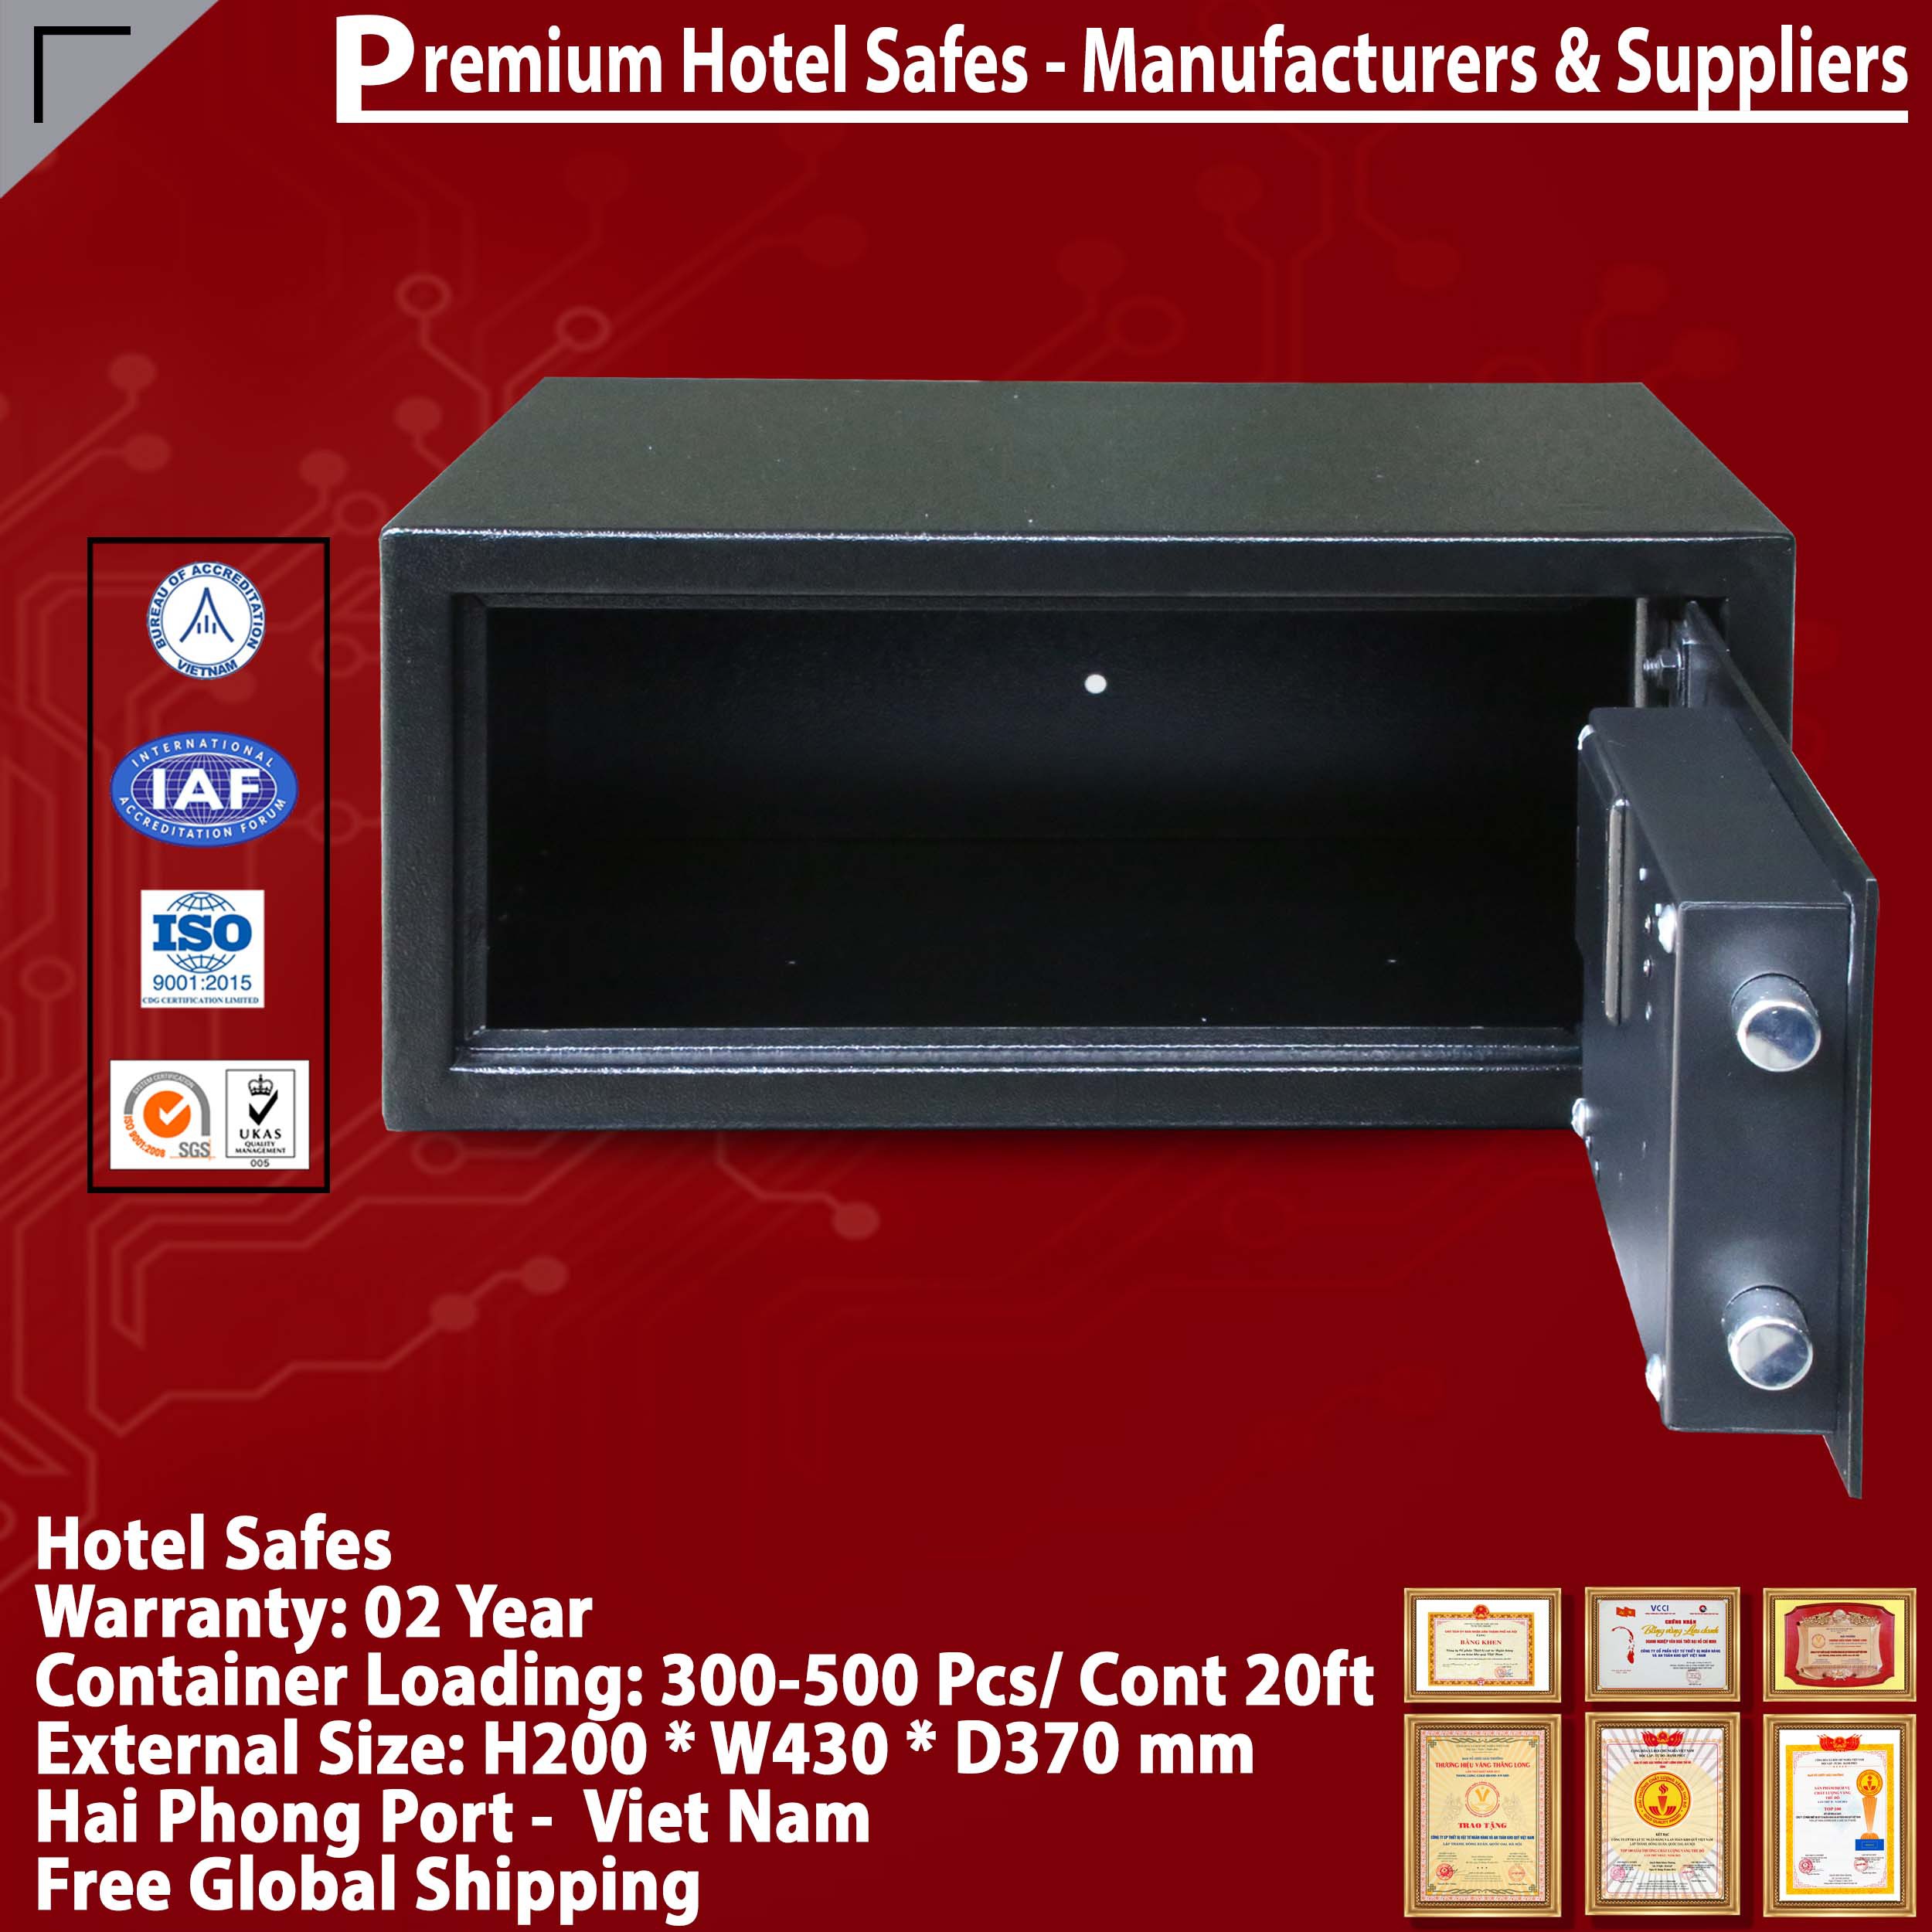 Best Sellers In Hotel Safes Made In Viet Nam Lock